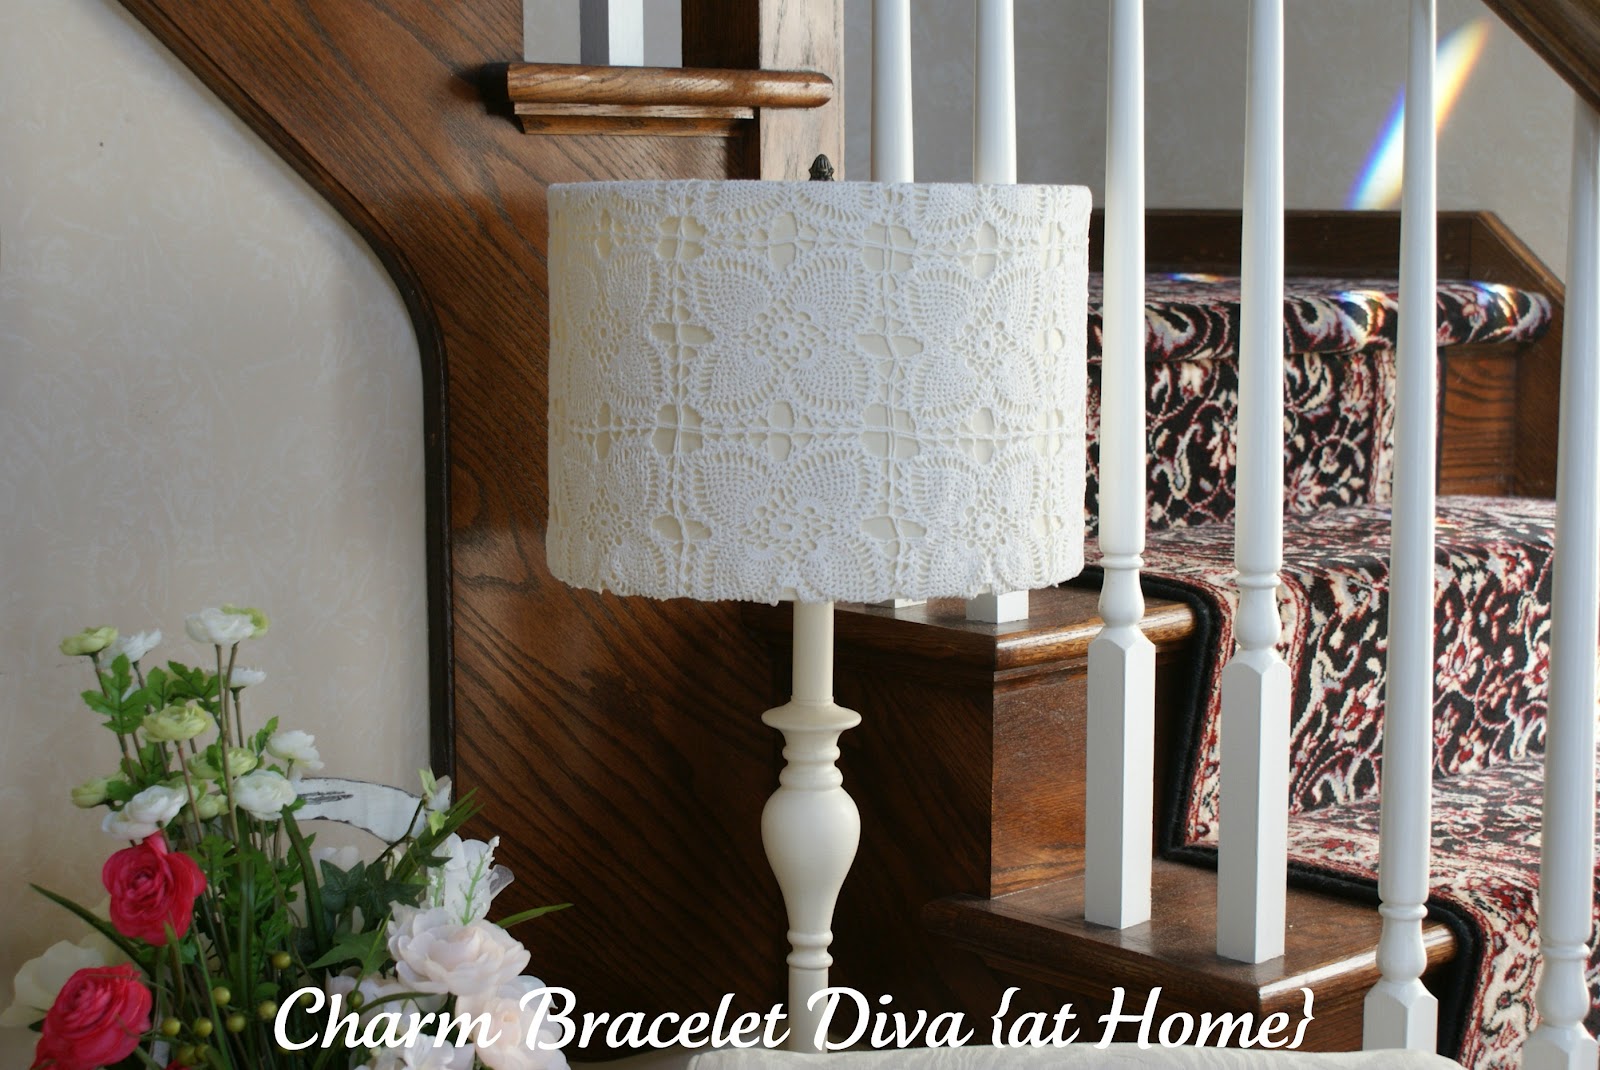 Pier 1 Imports Lace Lampshade Knock Off, Pier One Lamp Shades